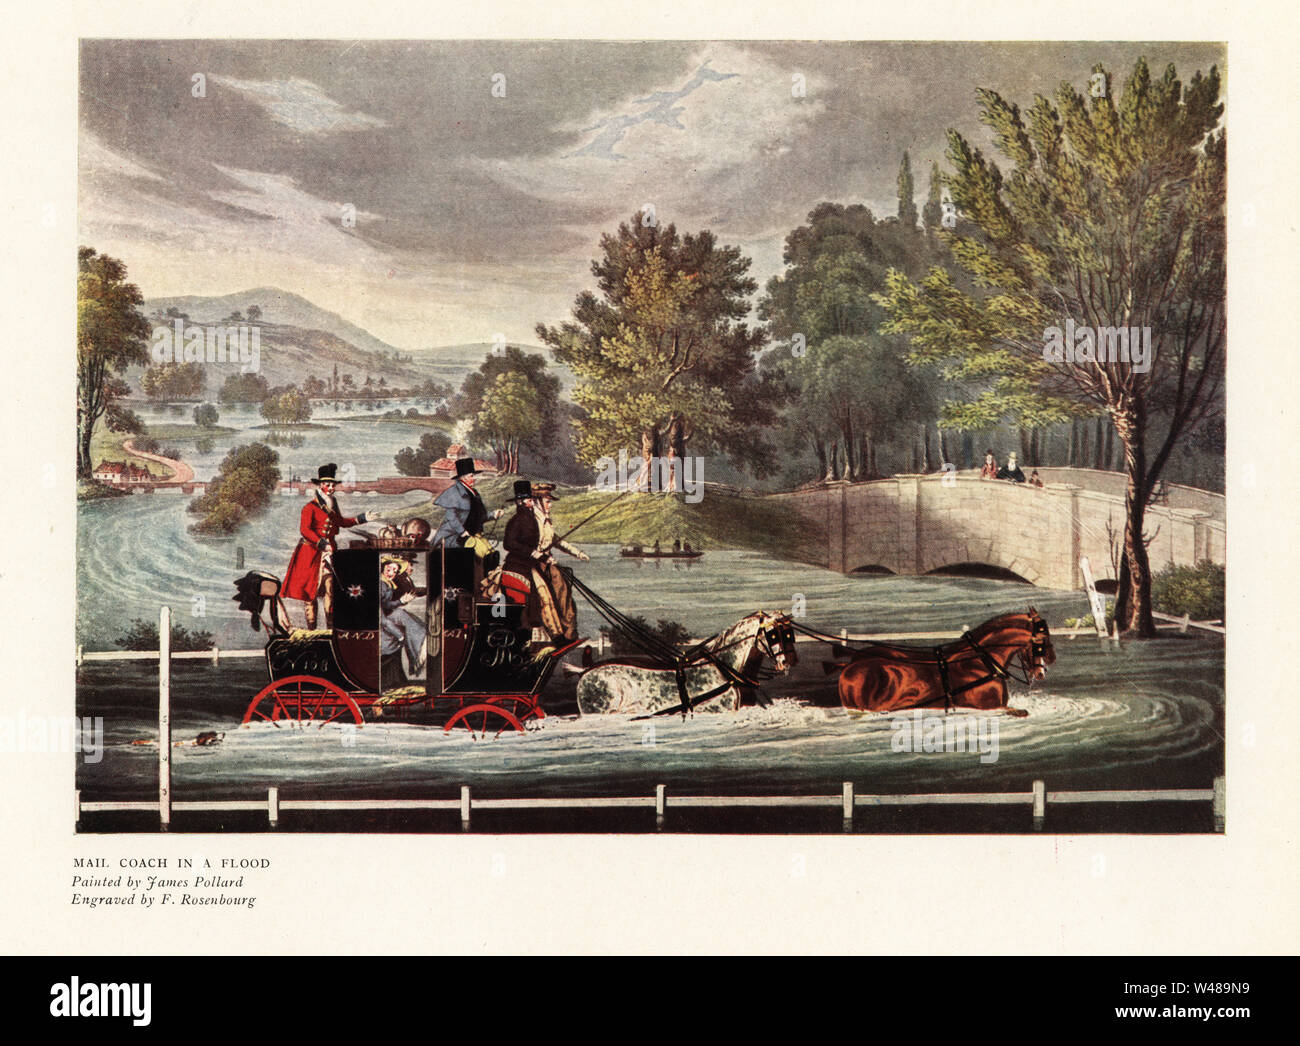 Mail coach in a flood. Royal mail four-horse coach with liveried guard driving through a flooded riverside road, 1820s. Color print after an engraving by F. Rosenbourg from an illustration by James Pollard in Ralph Nevill’s Old Sporting Prints, The Connoisseur Magazine, London, 1908. Stock Photo